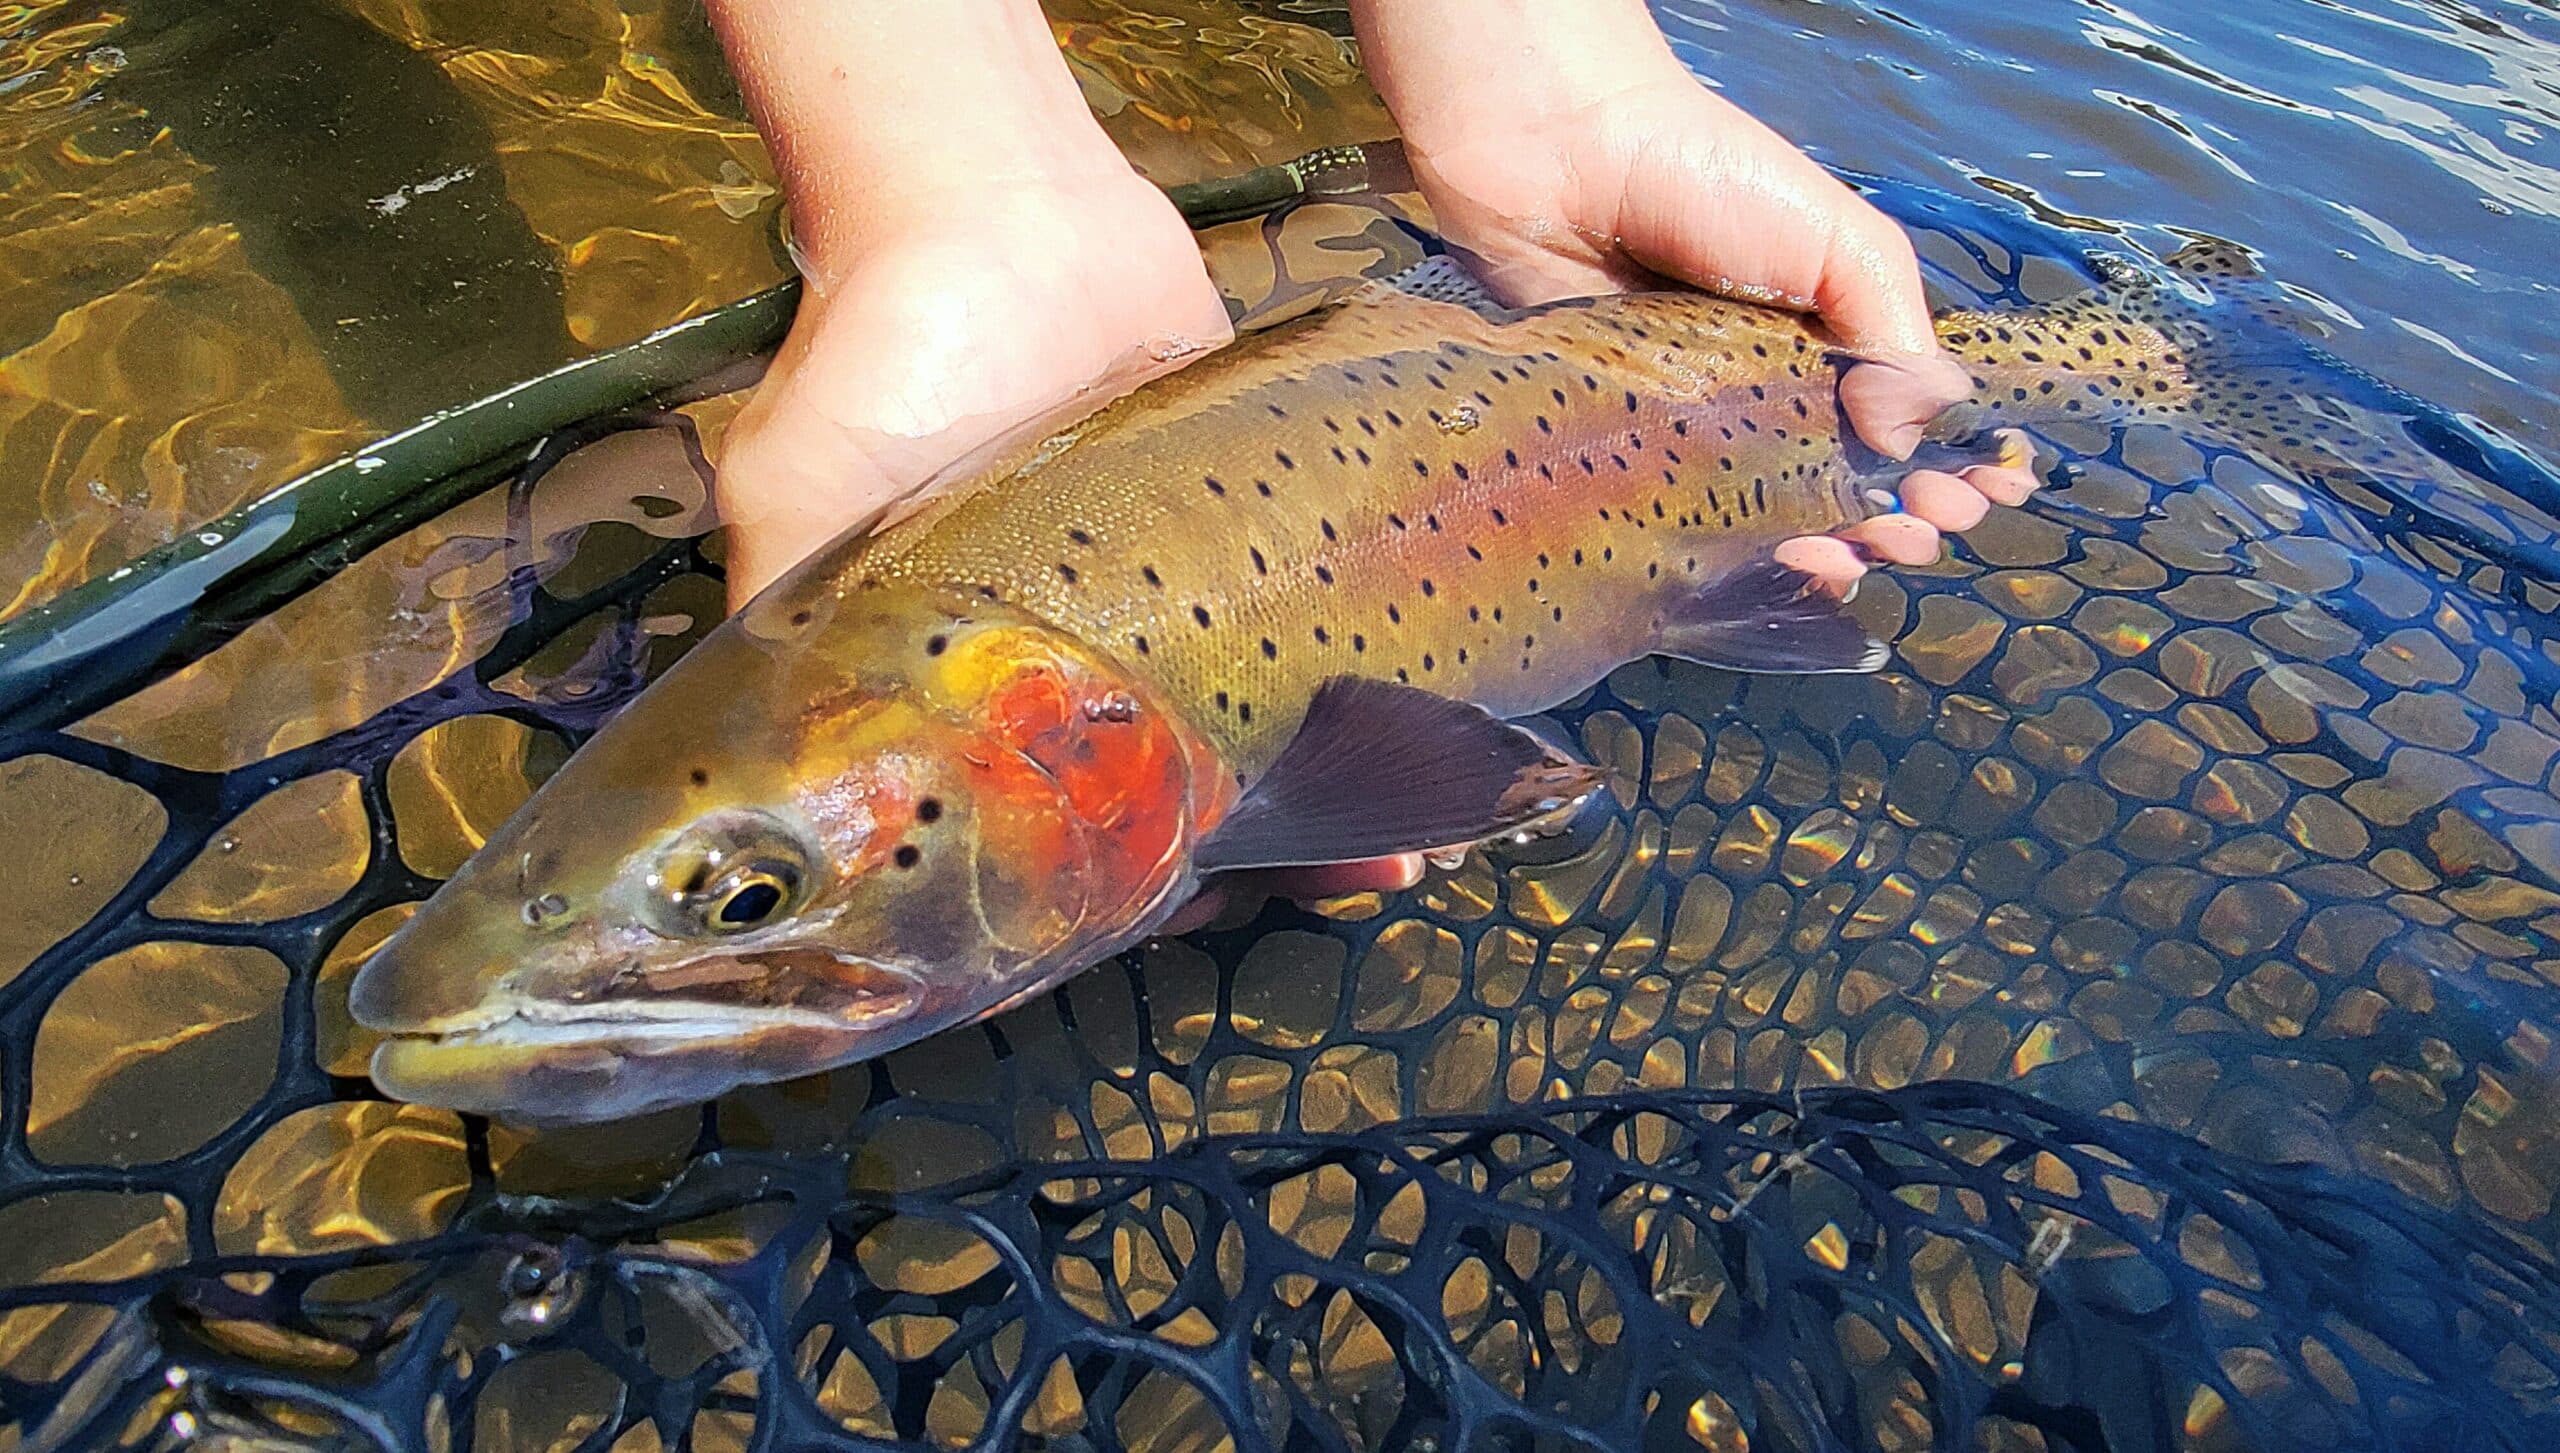 Truckee River Fly Fishing Report- June 22nd